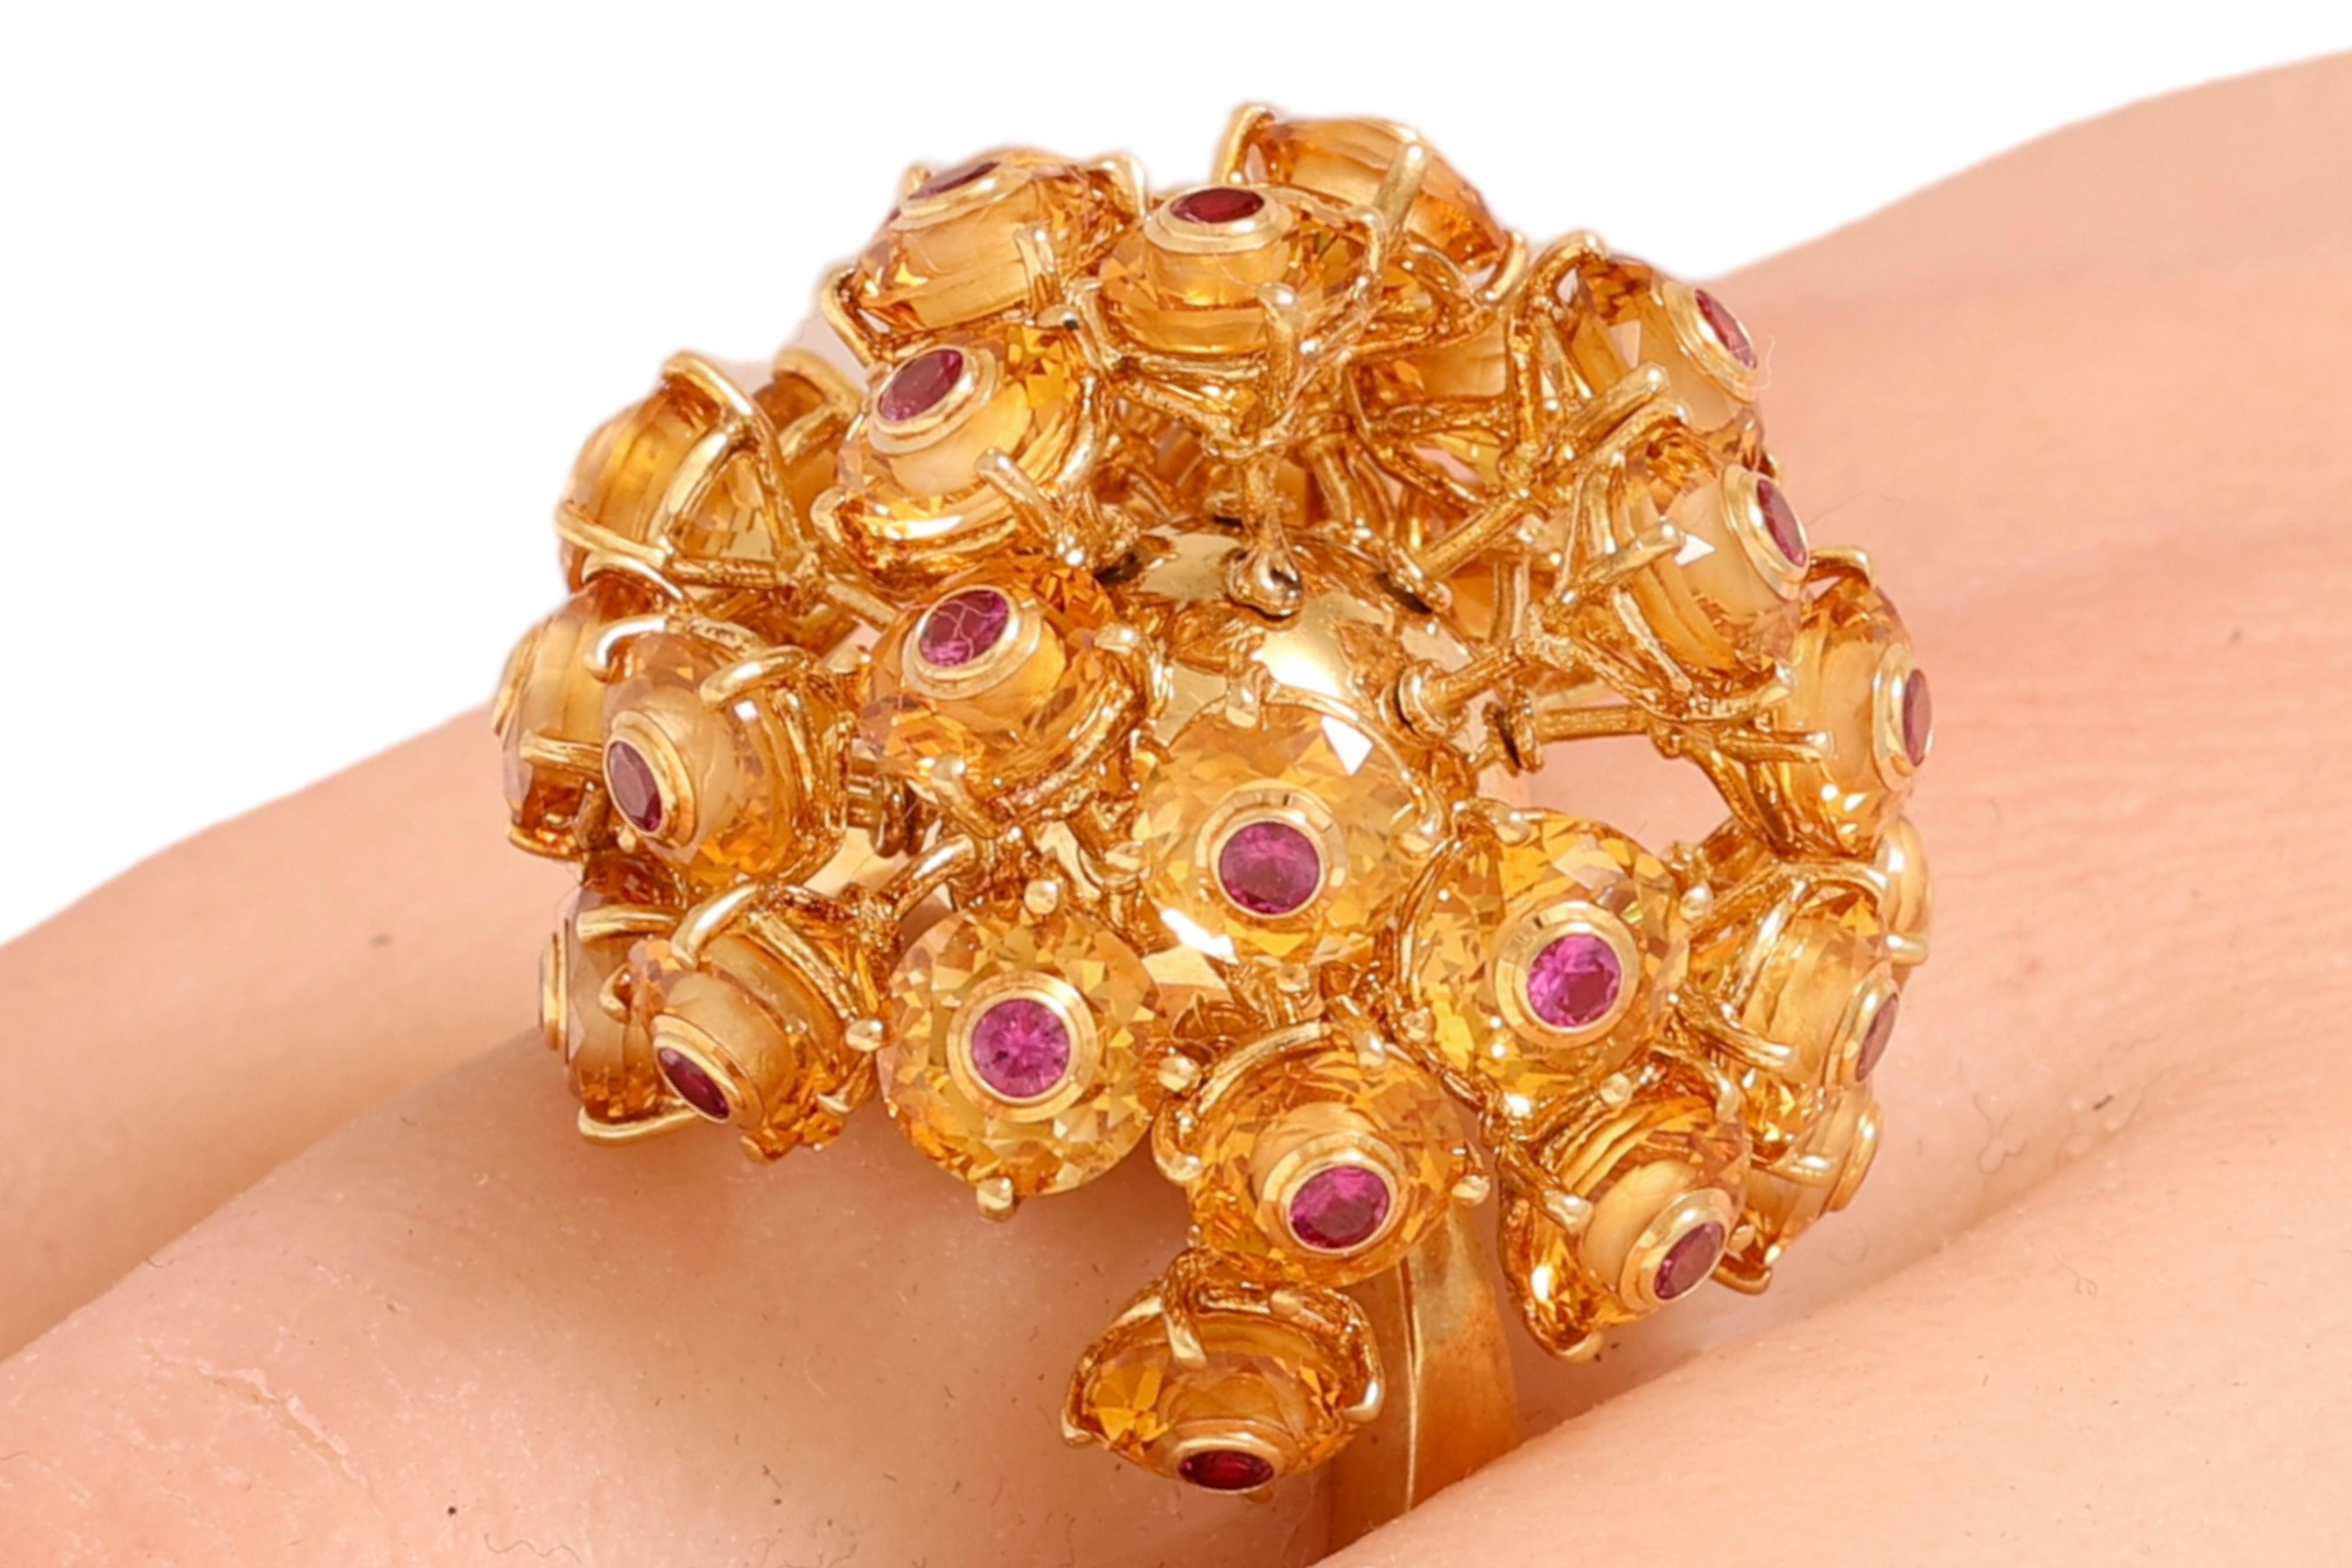  18 kt. Yellow Gold Ball of Moving 1.65 ct. Rubies and Citrine For Sale 3